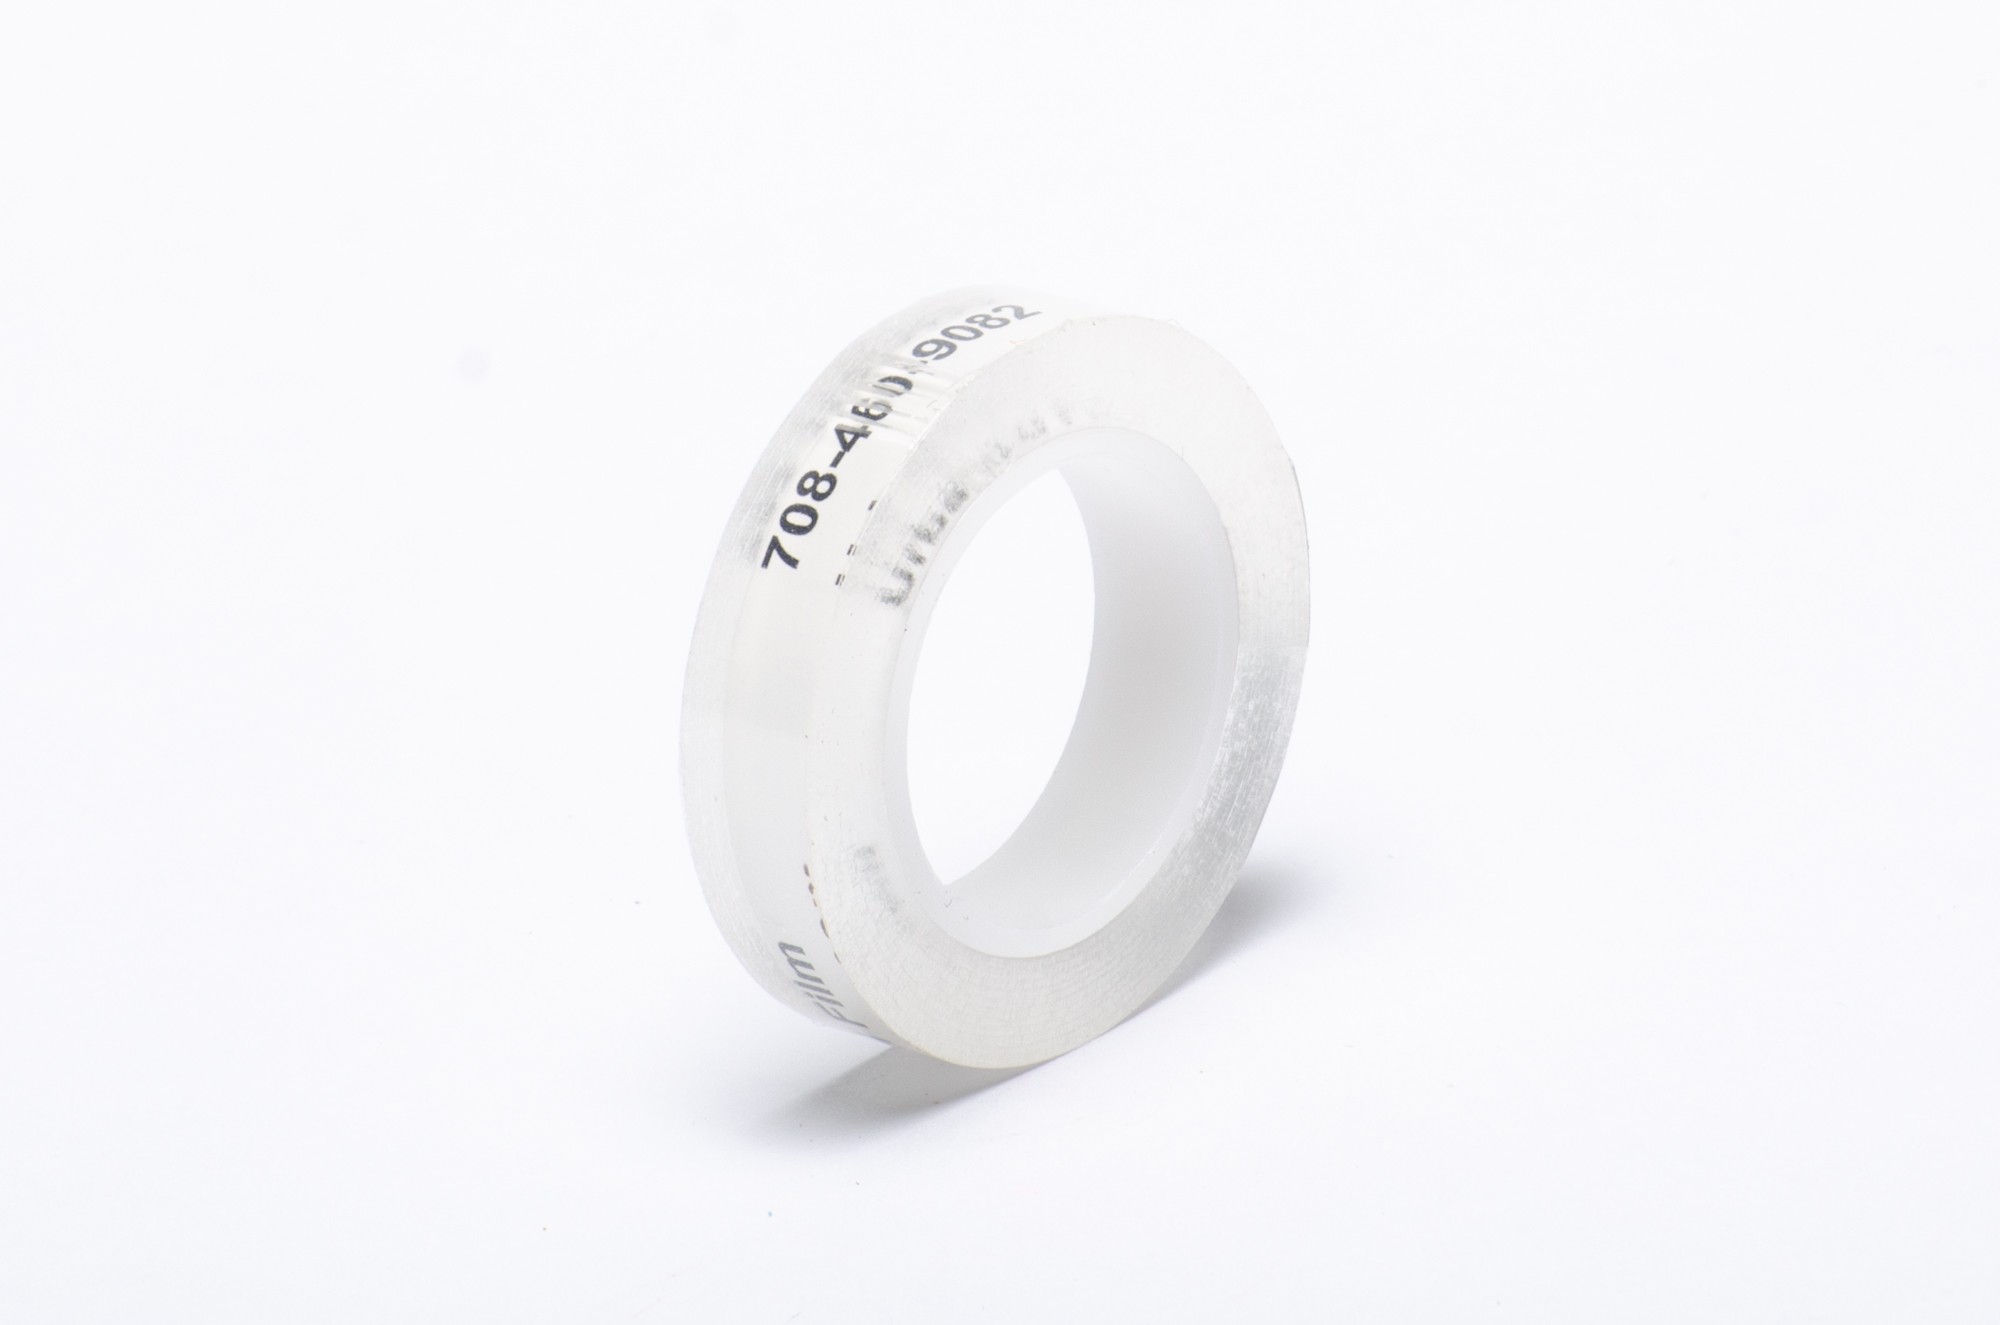 8mm non perforated film splicing tape